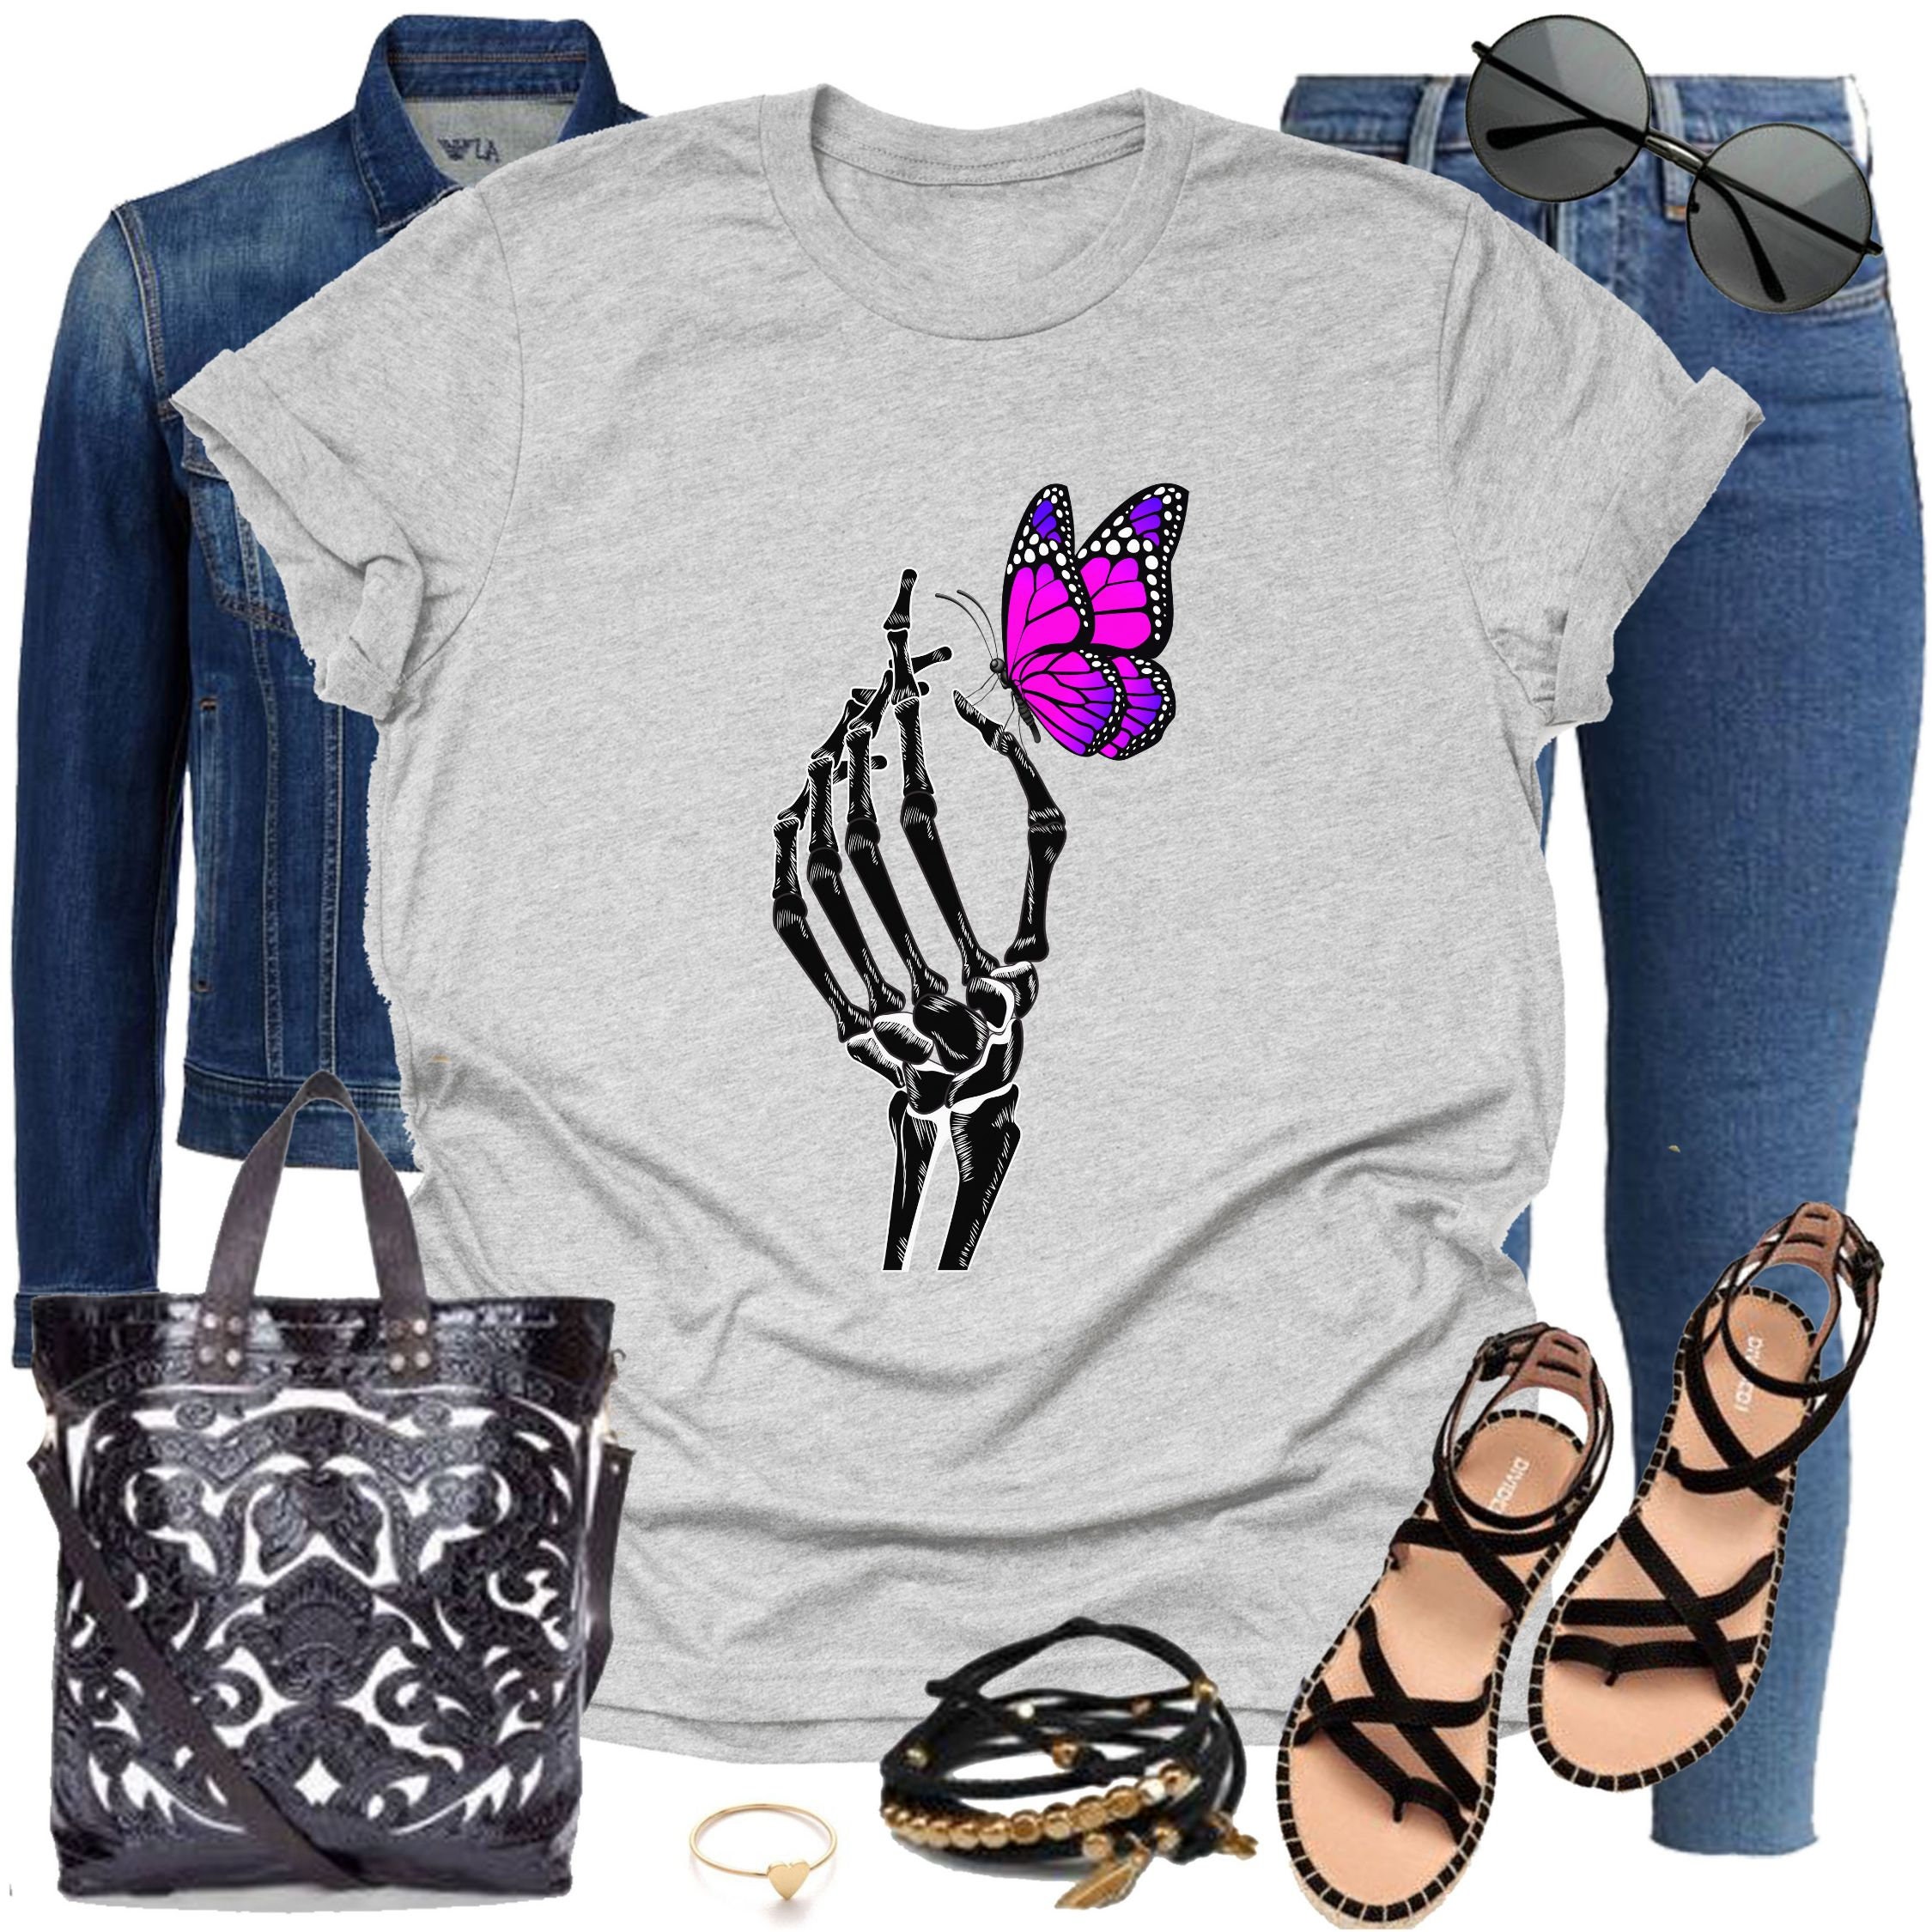 Discover Skeleton Hand Butterfly Shirt | Goblincore T Shirt | Fairycore T shirt | Mom Birthday Gift | Grunge Shirt | Gift for her | Spooky Shirt